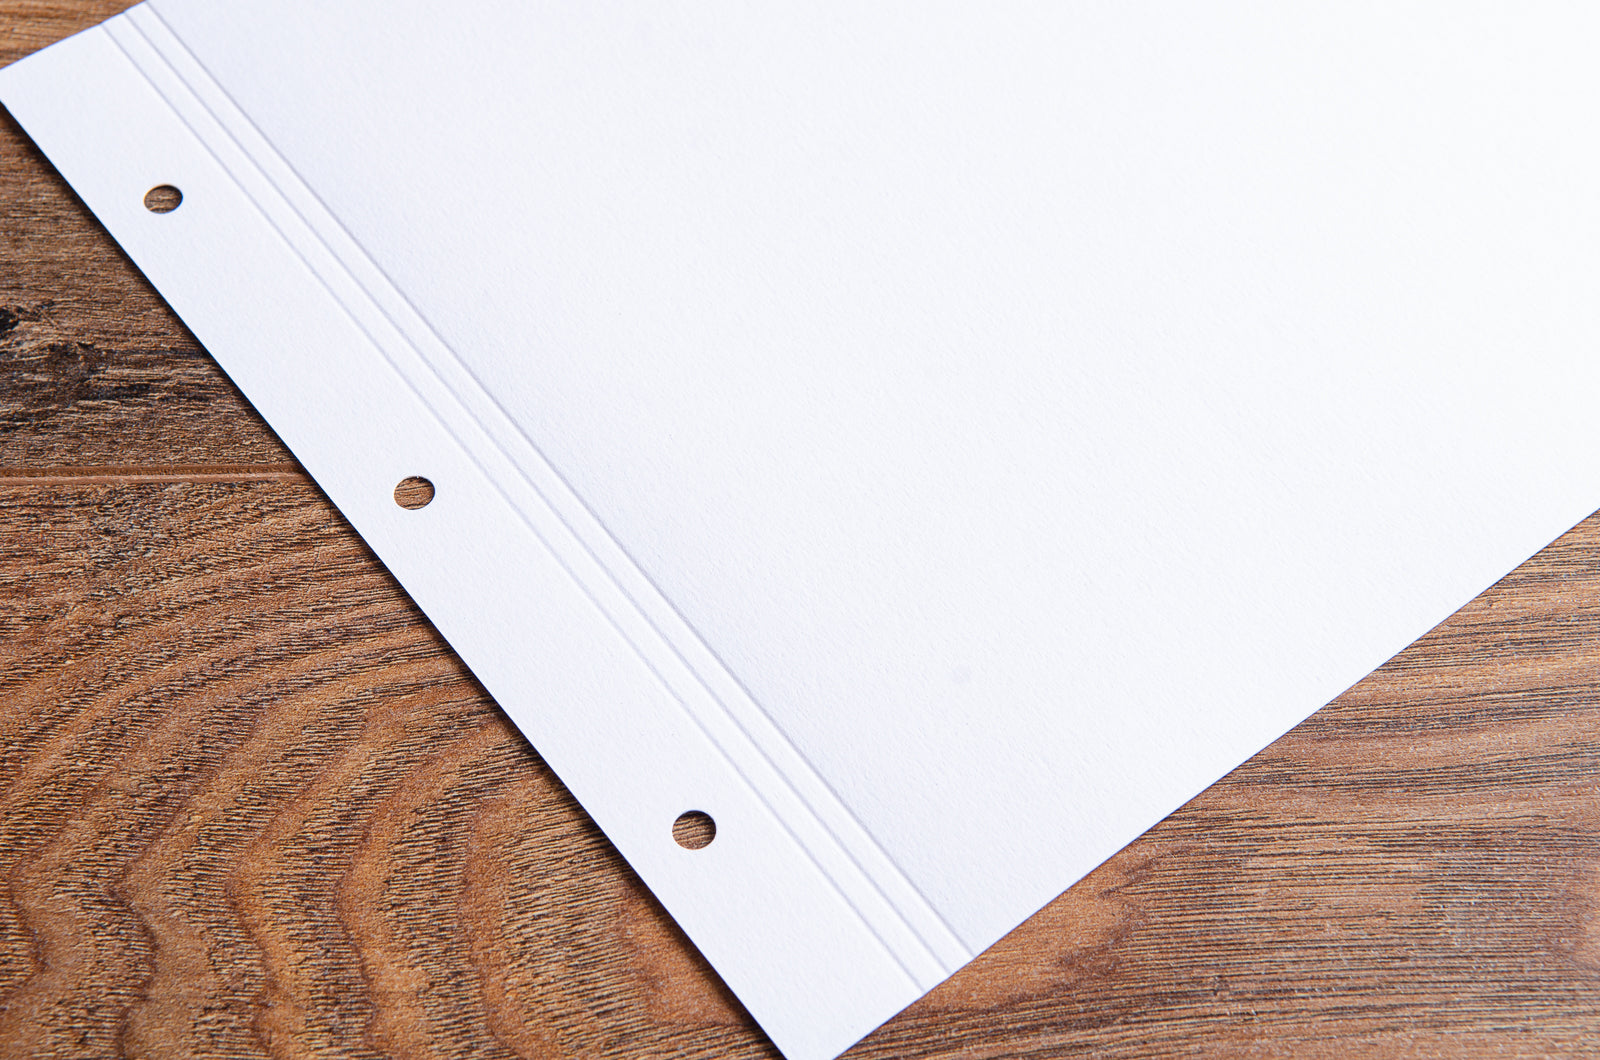 8.5x11 landscape 175gsm paper pre punched with holes and creases and score marks for easy turning